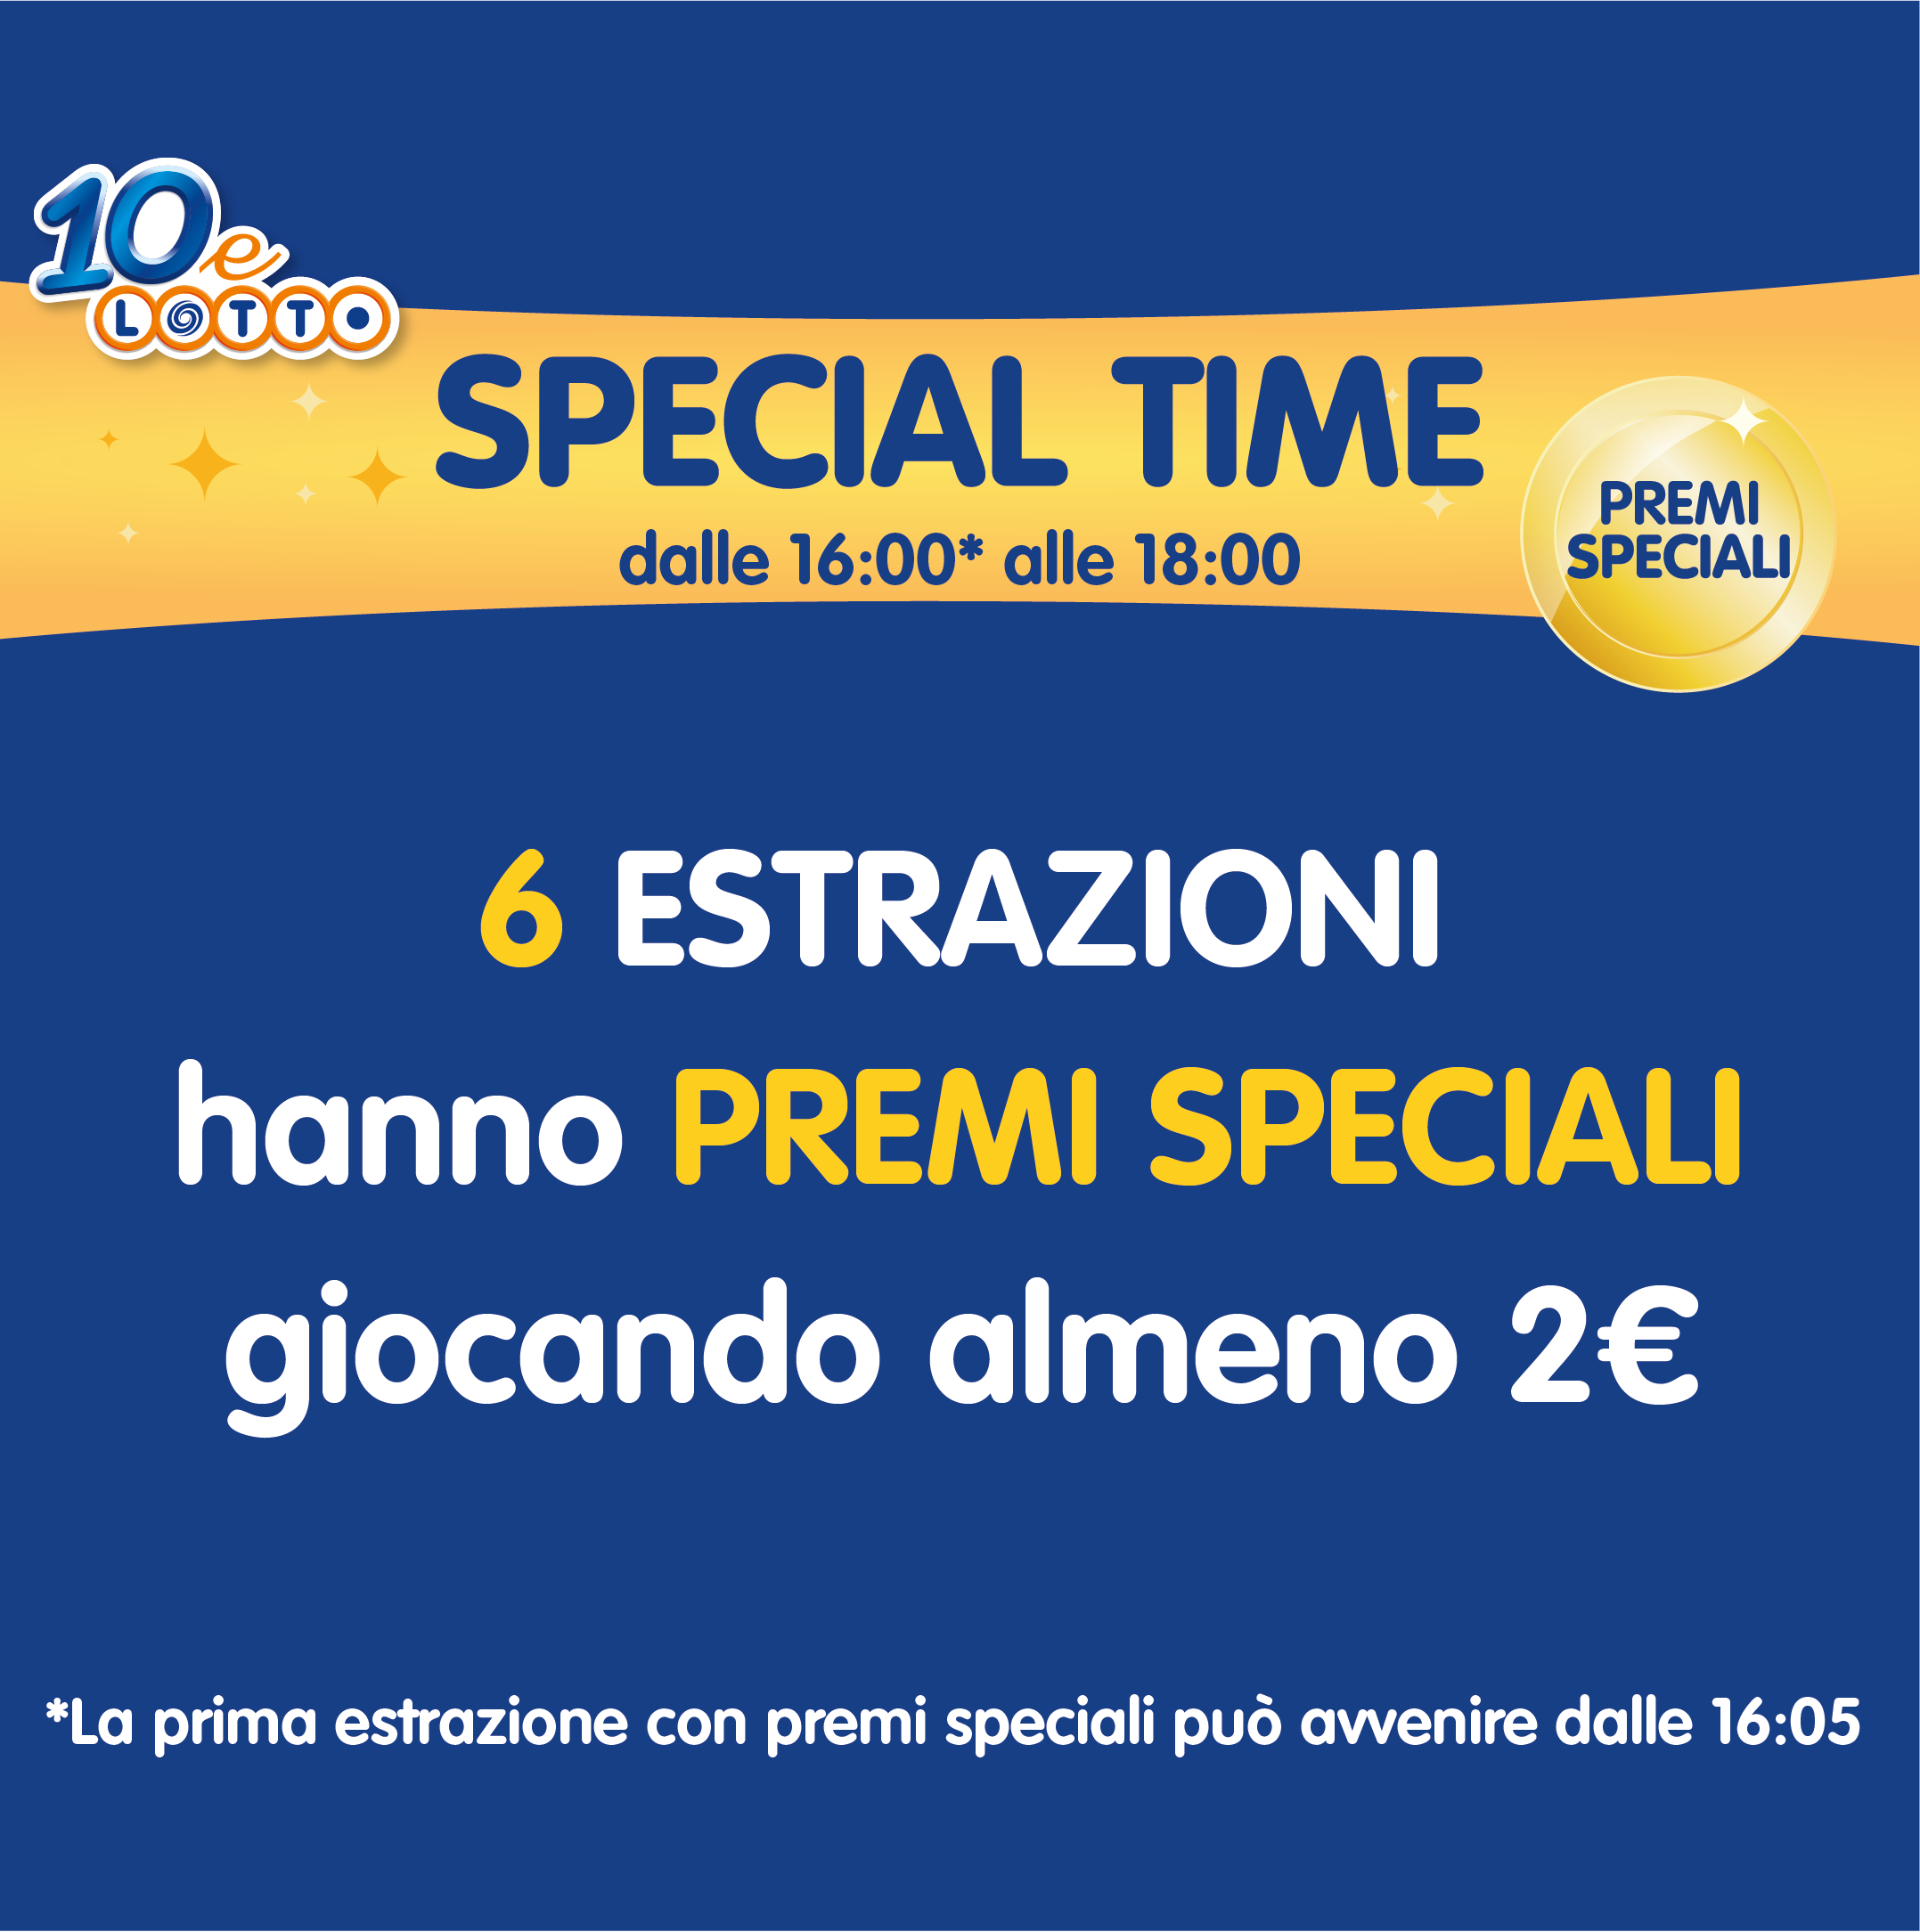 10eLotto Special Time